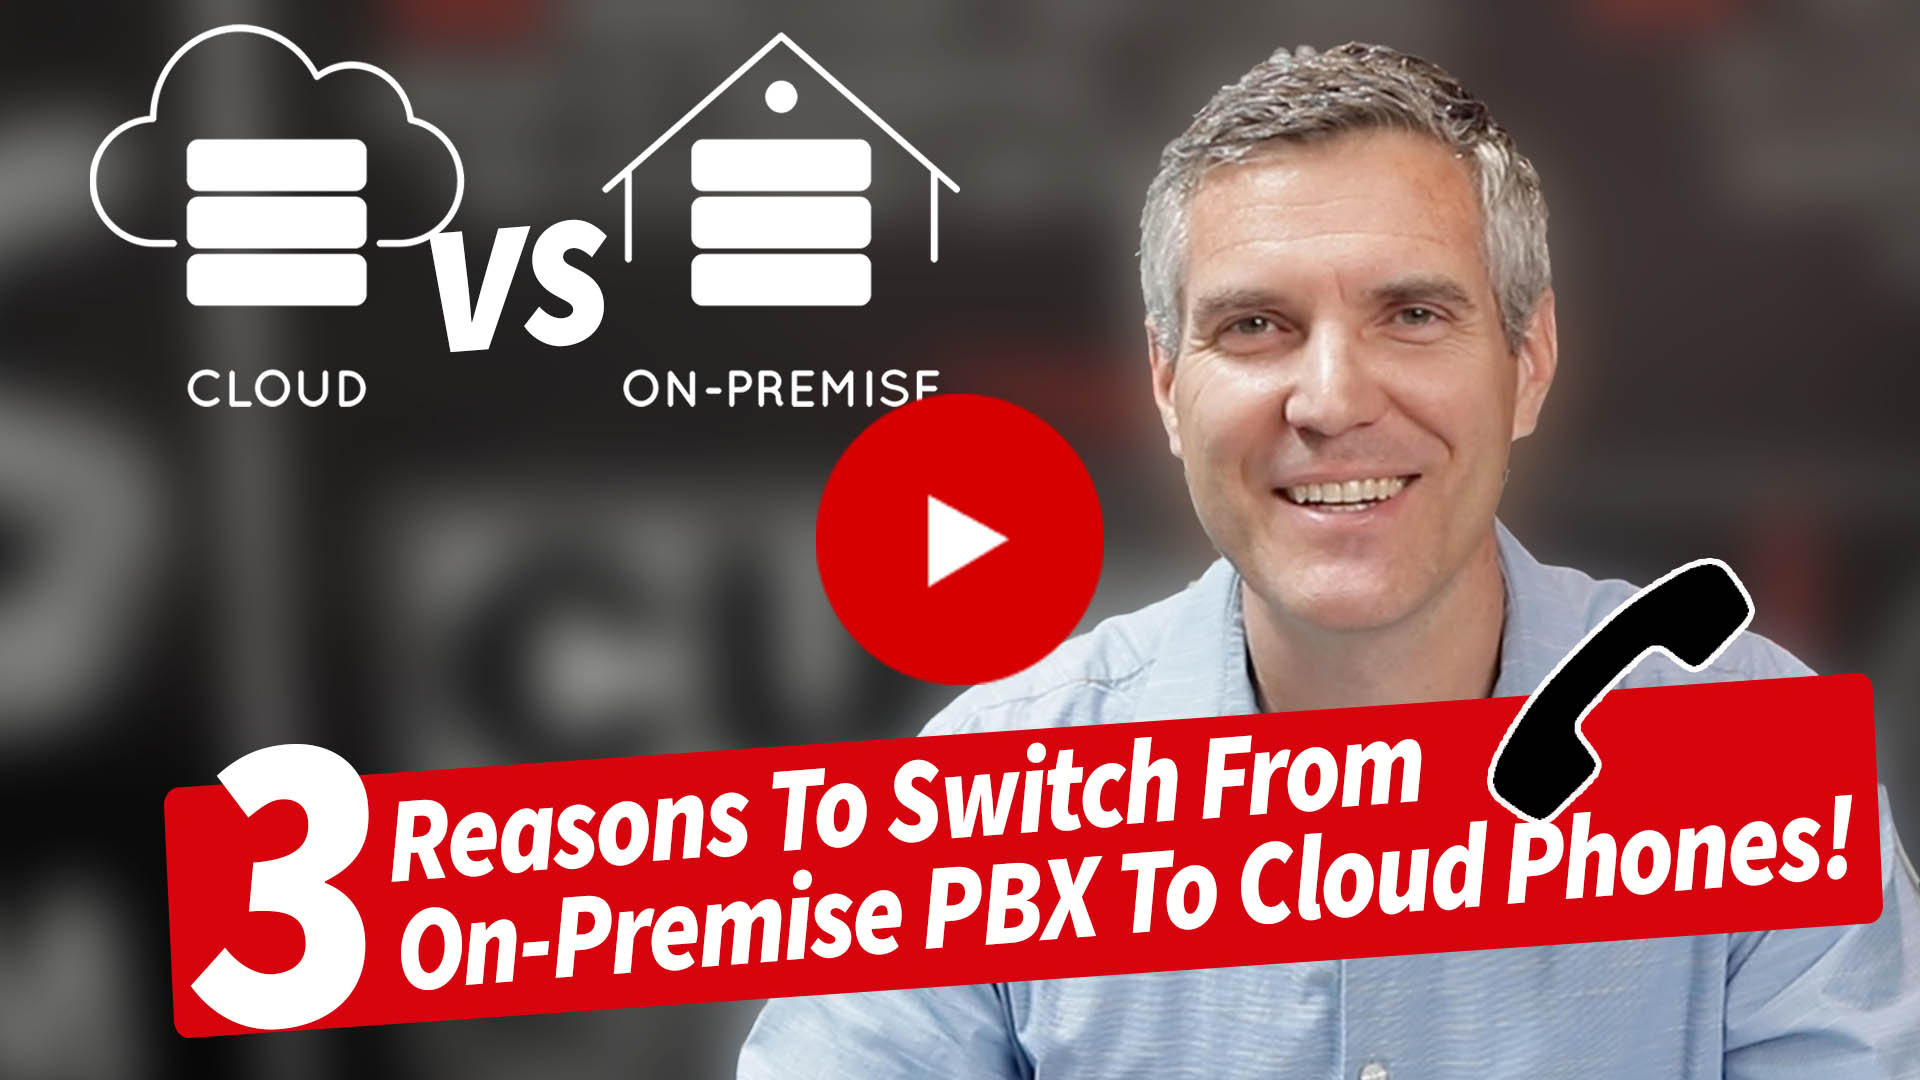 3 Reasons To Switch From On-Premise PBX To Cloud Phones